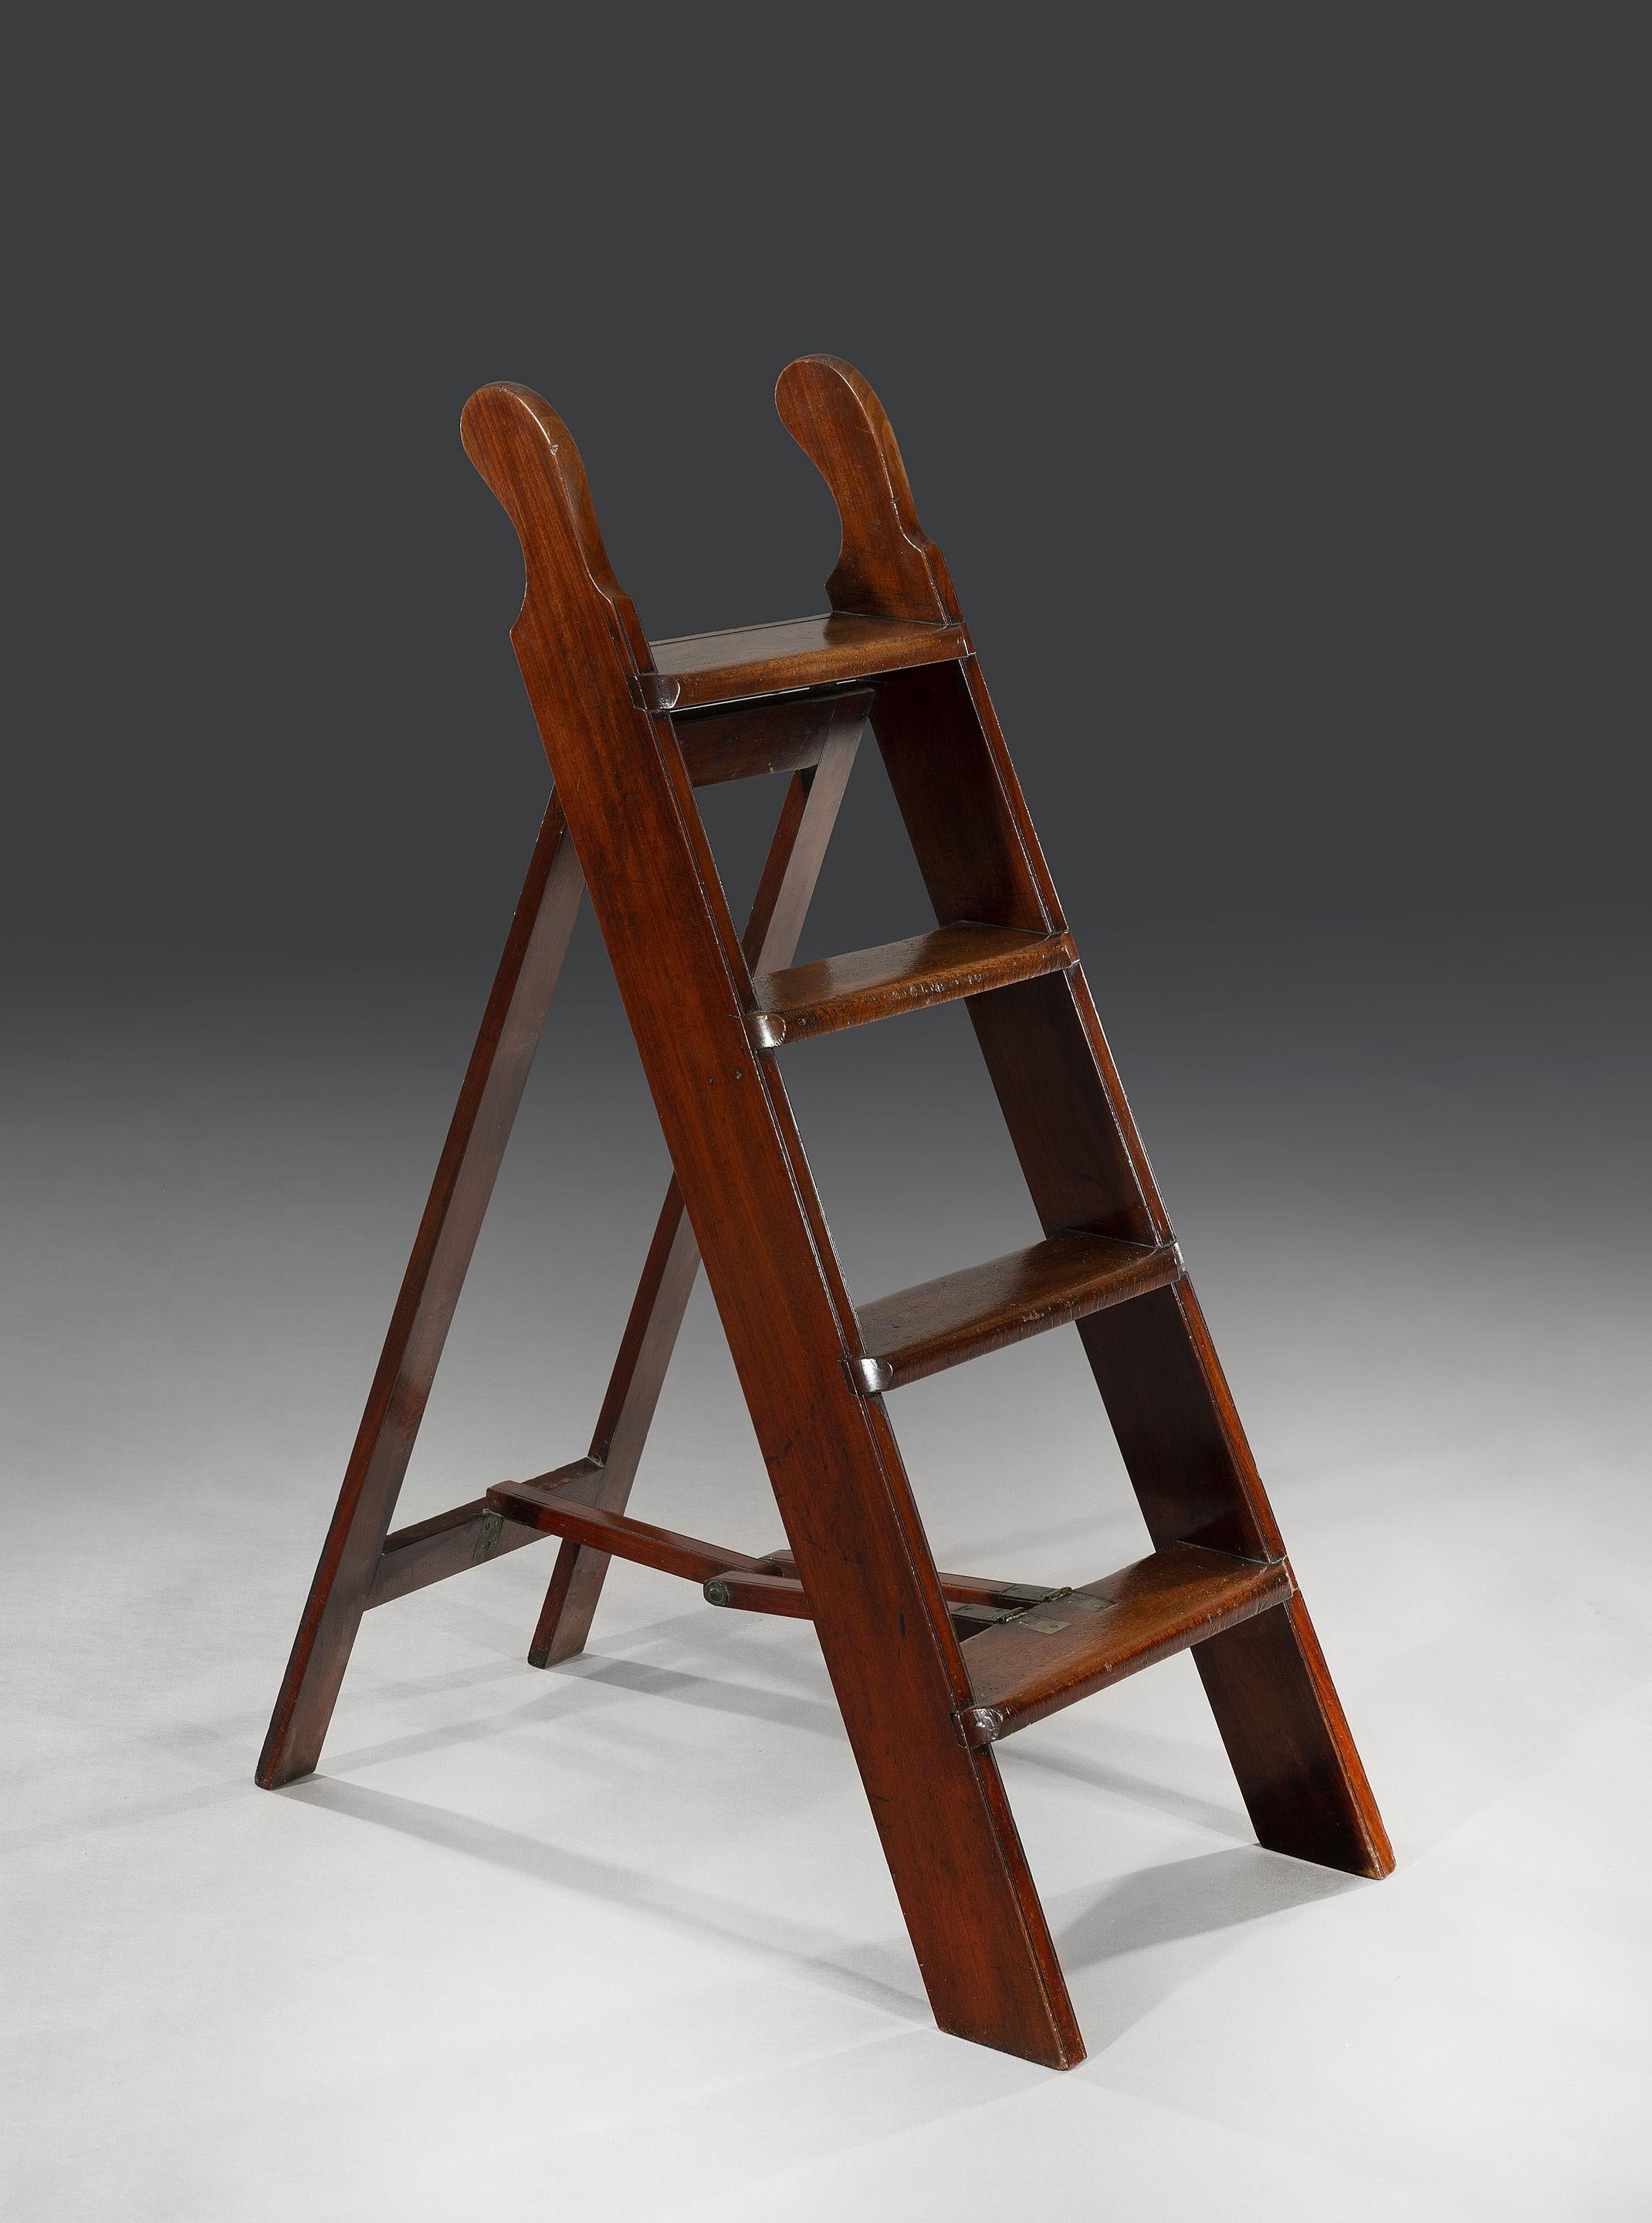 The mahogany folding library steps are in excellent condition with no breaks or splits. The steps are designed to fold flat and are hinged on gilt-brass fittings.